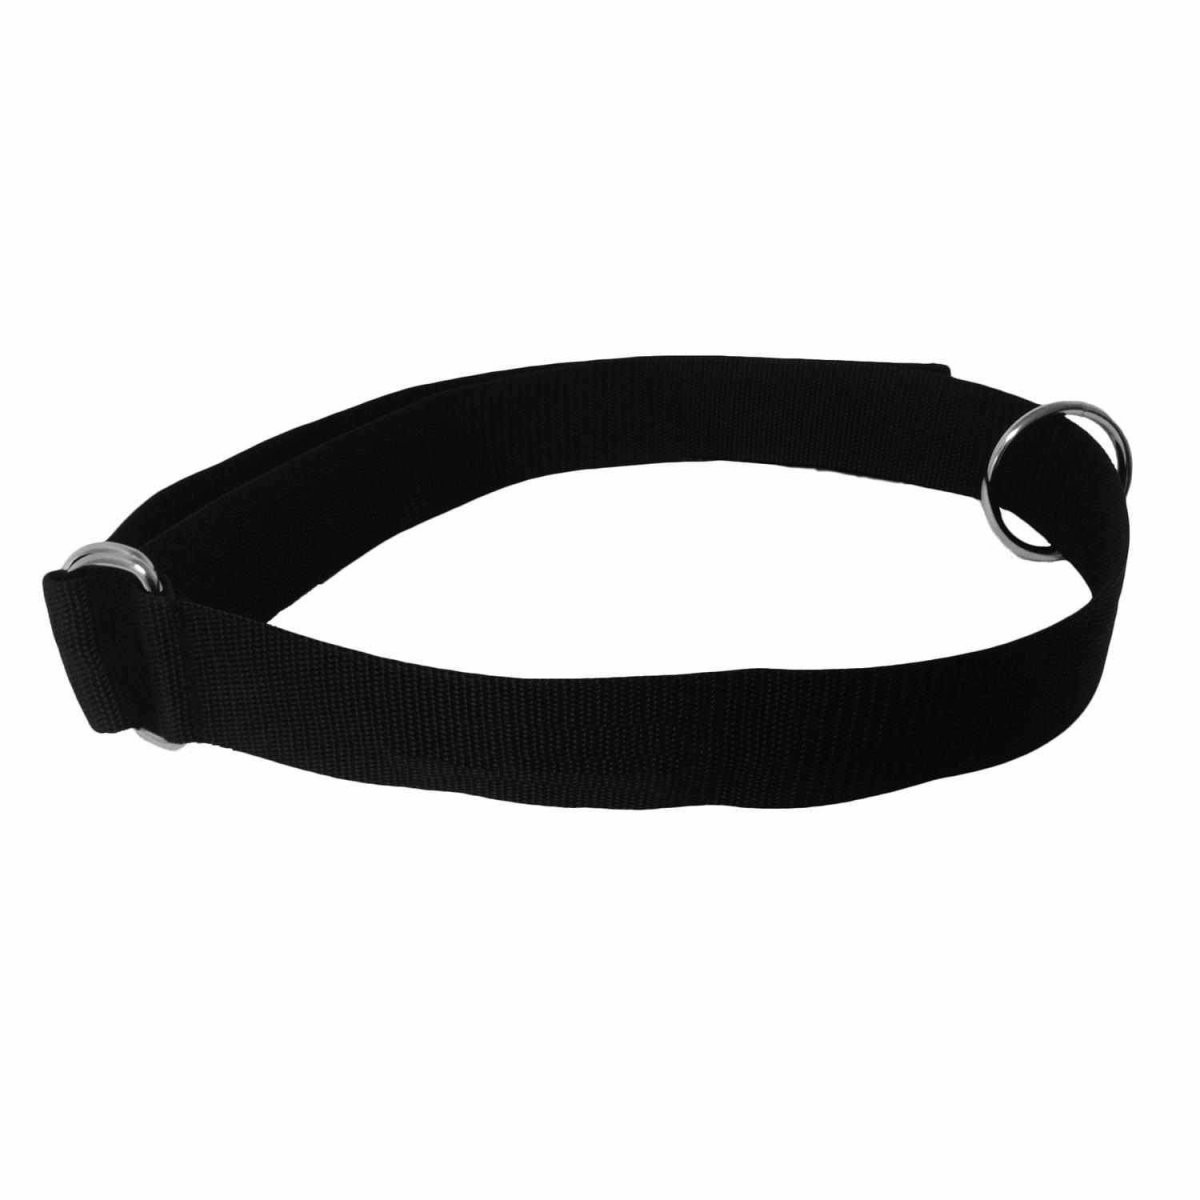 FitCord Fitness Belt - FitCord Resistance Bands Rocket Bungee Waist Belt-FitCord Resistance Bands